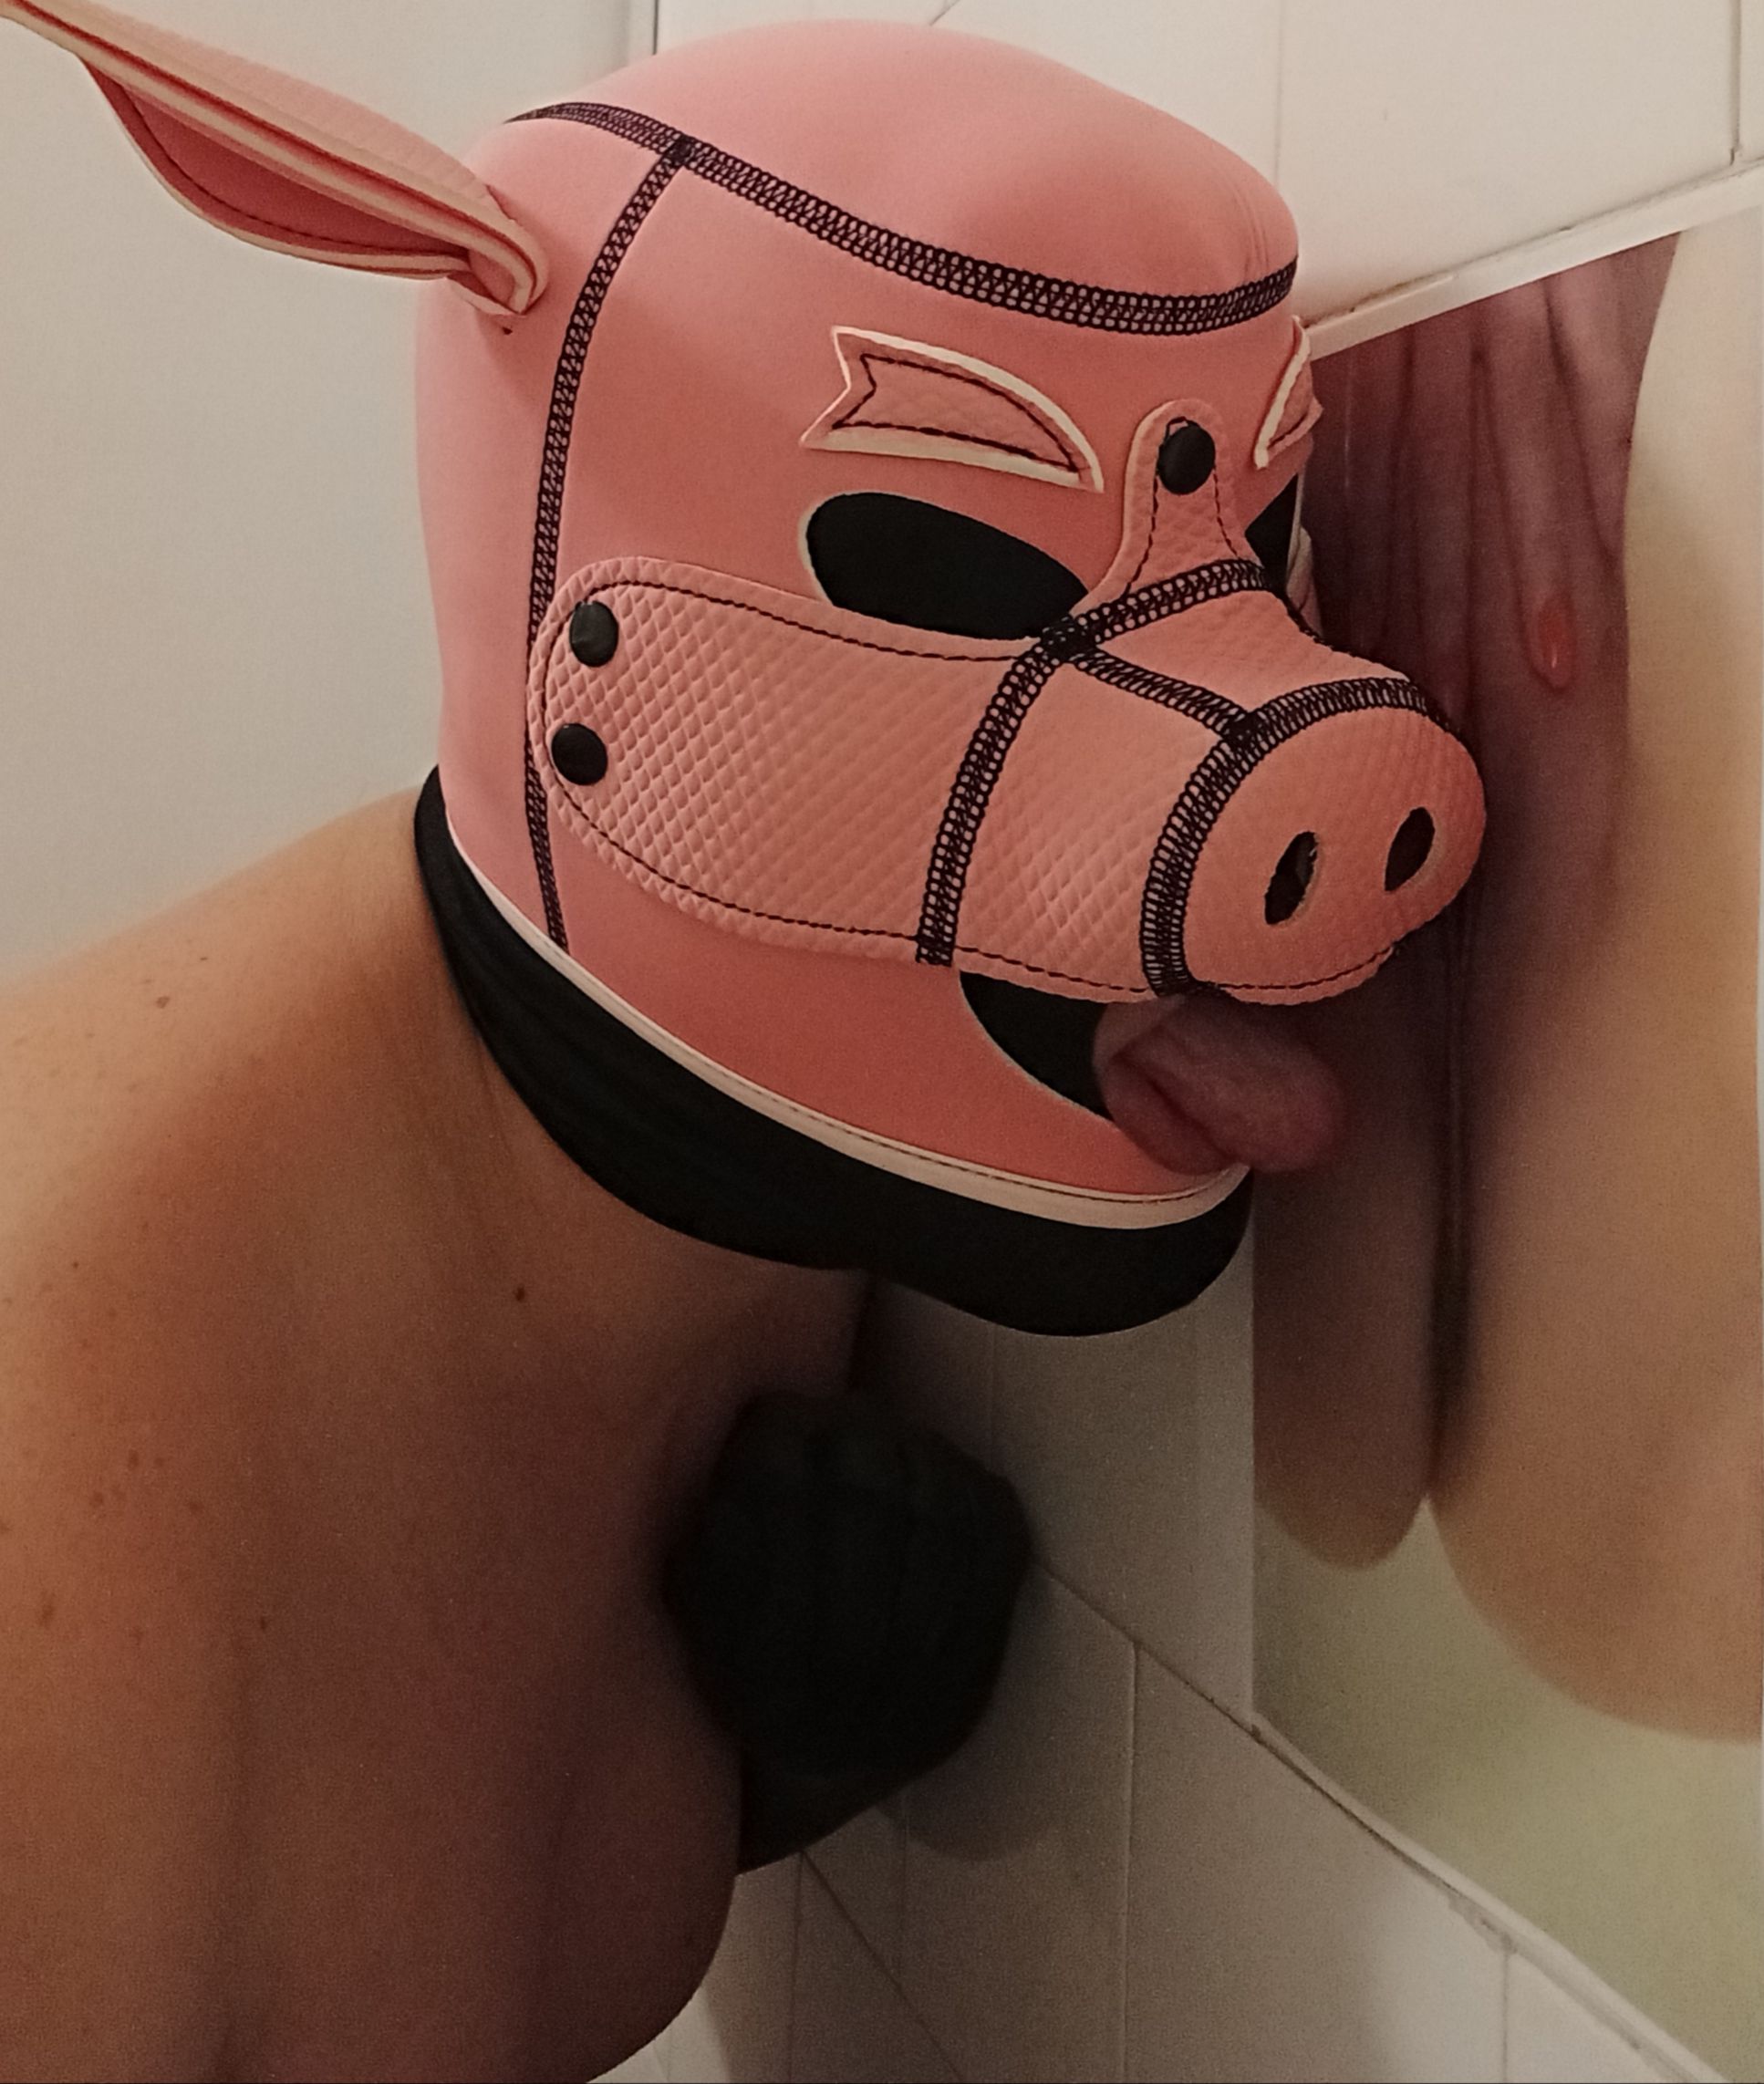 Horny pig loyal sex slave pamper Madame Michelle hot swollen wet pussy and sexy ass!